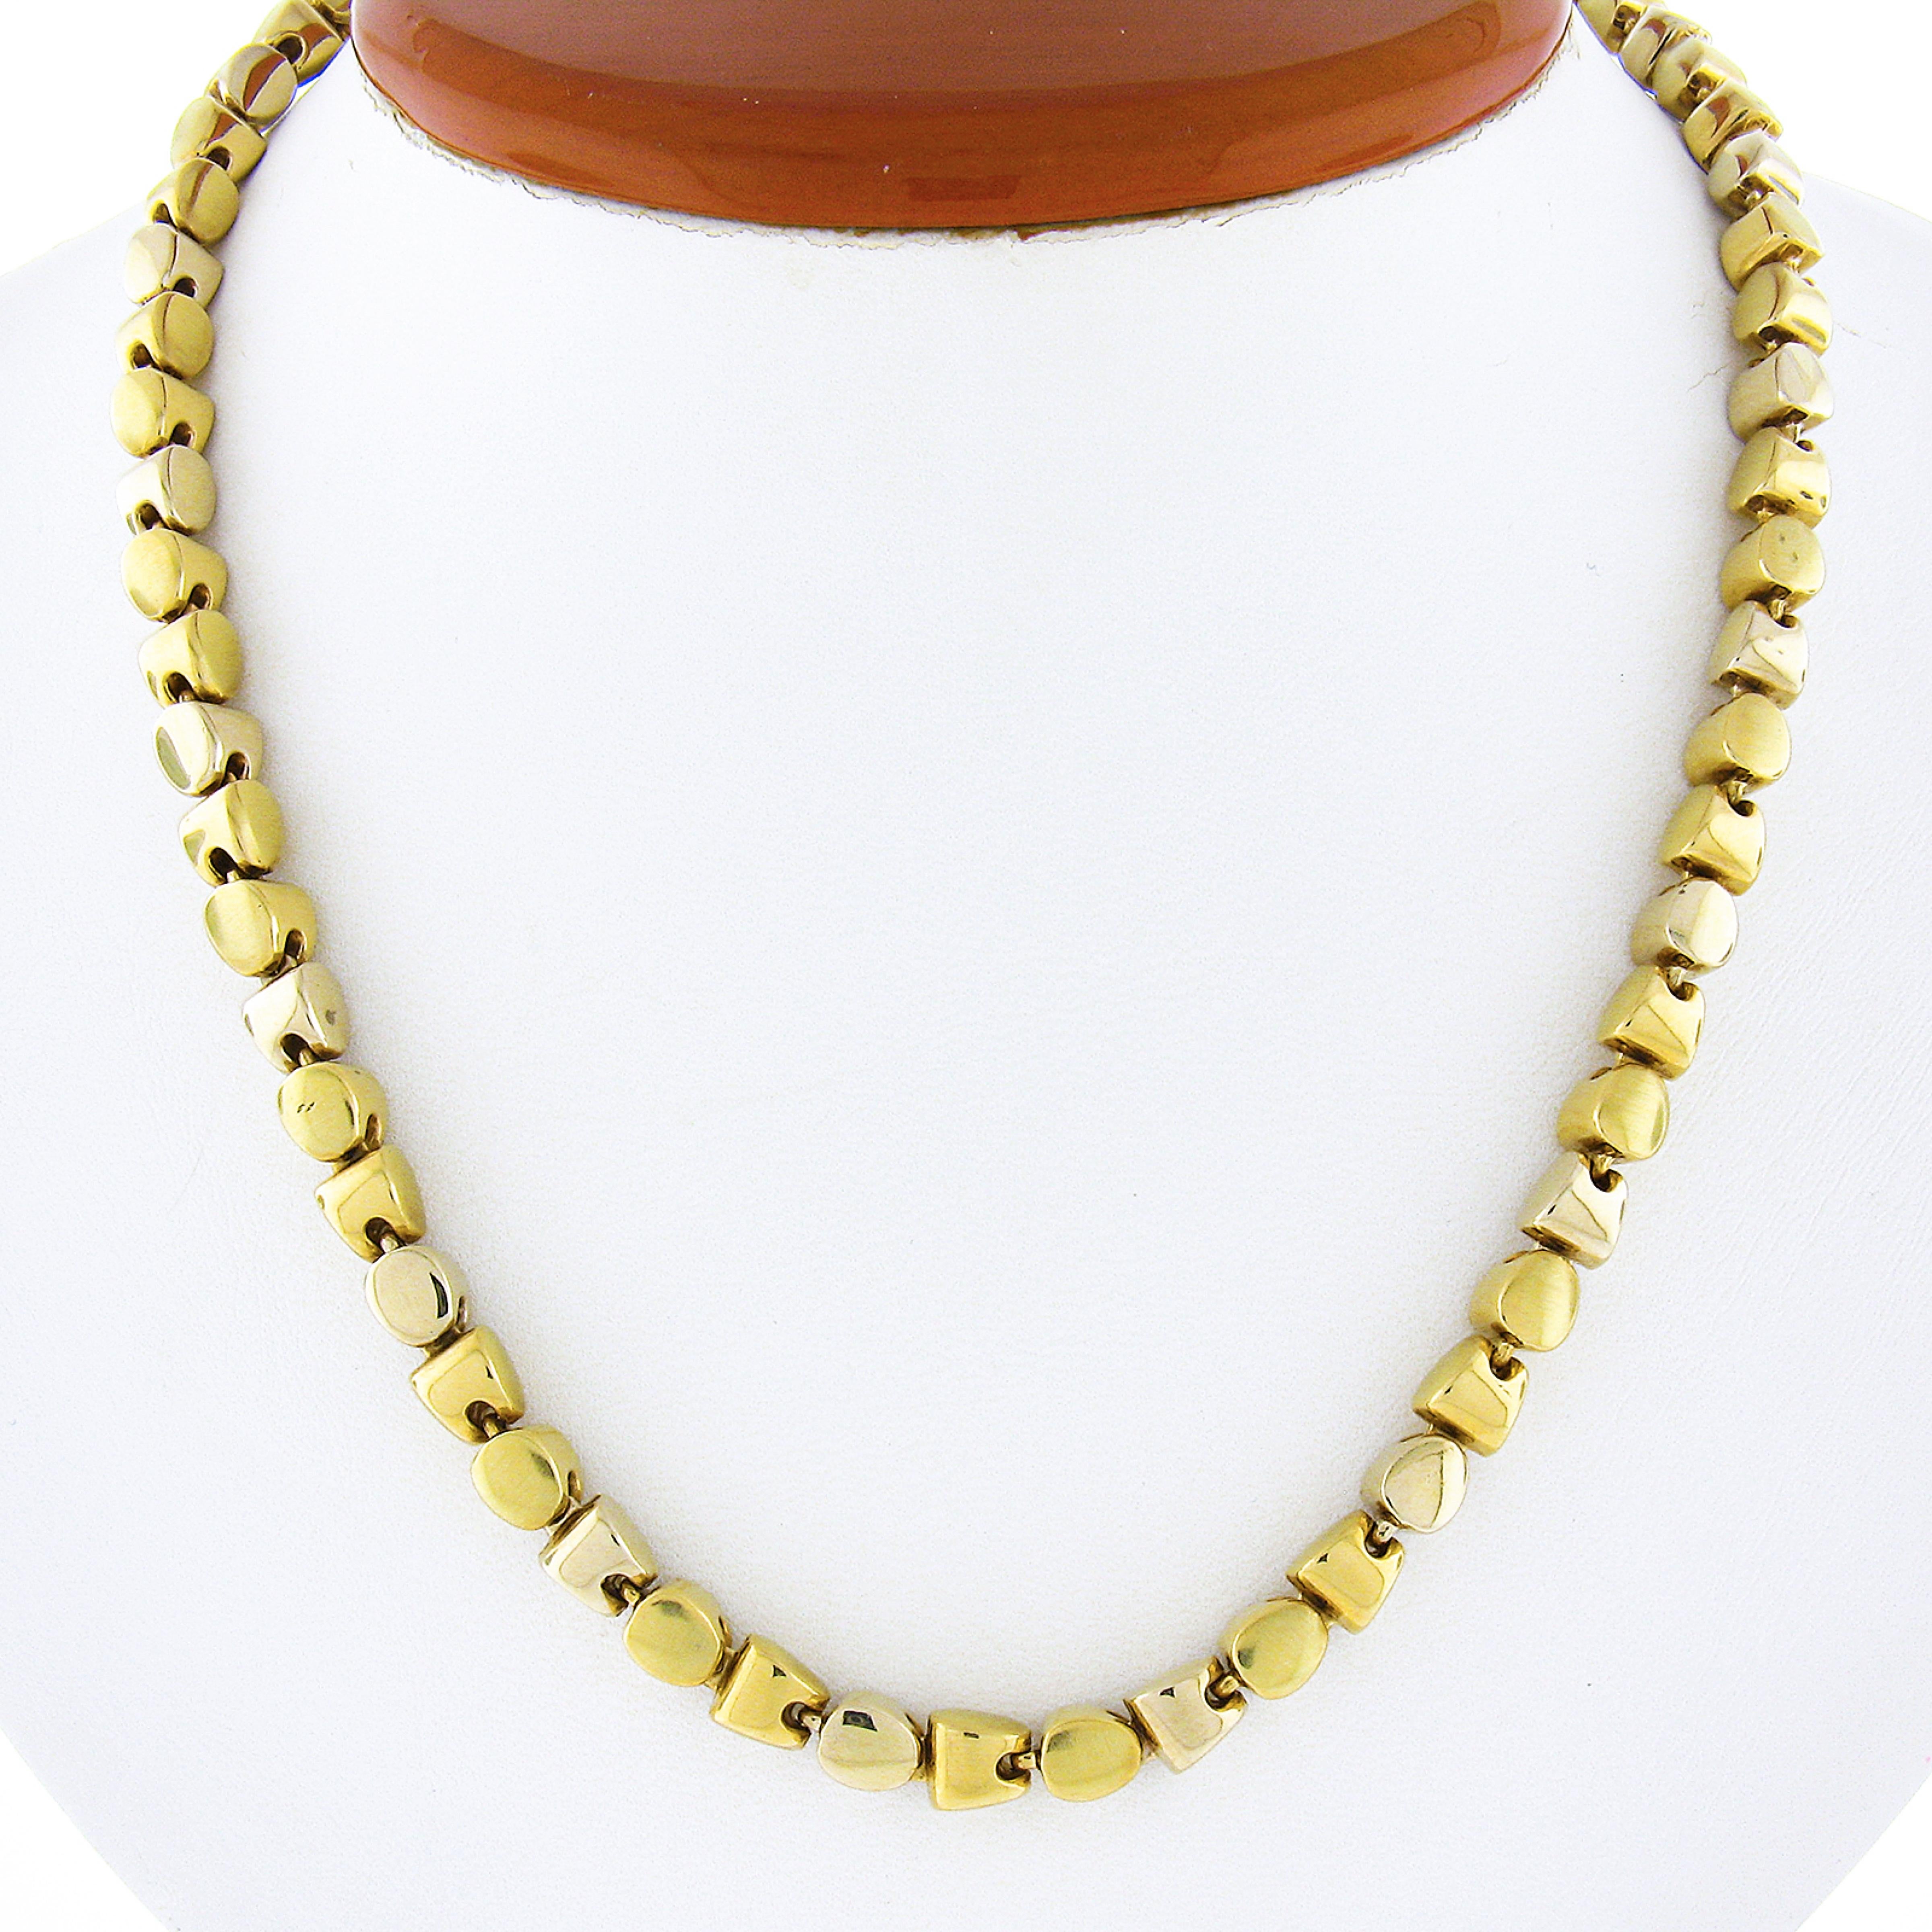 Here we have a unique chain necklace that was crafted from solid 18k yellow gold. The necklace features simple and elegant geometric links giving this piece its unique look. The links alternate with a high polished finish and a wonderful brushed